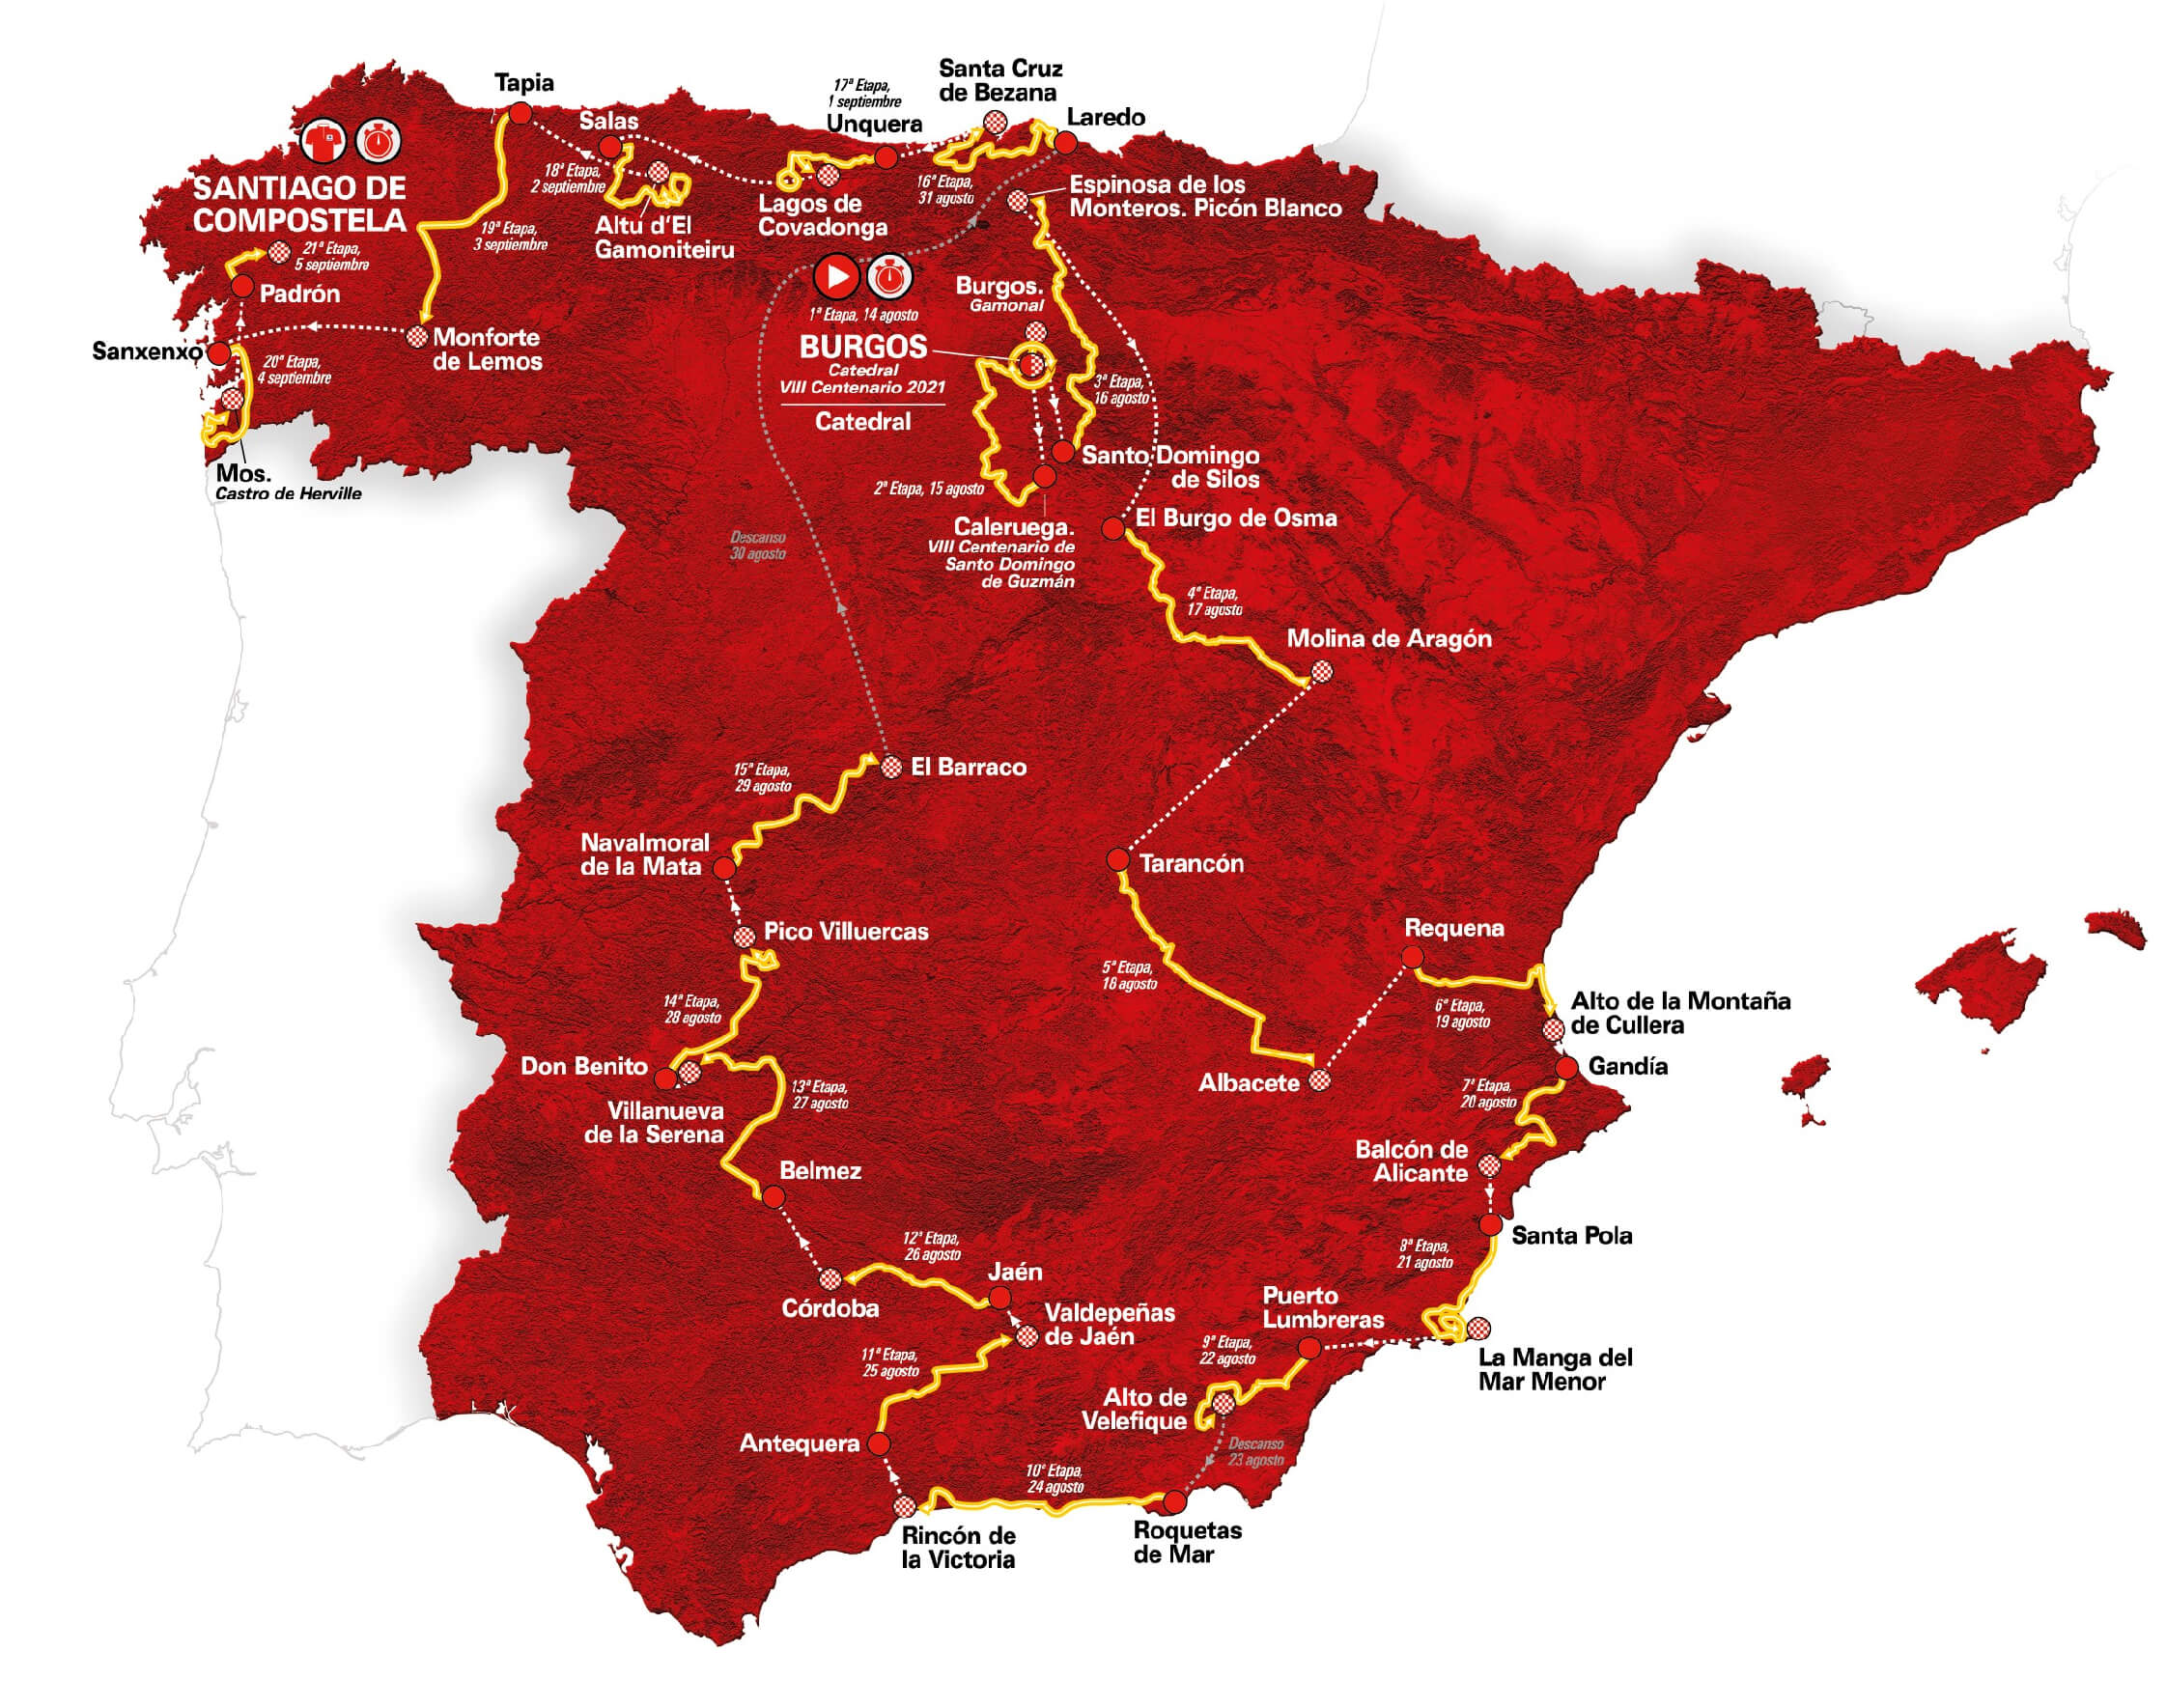 Vuelta a Espana 2021 Map and route of the race divided into 21 stages to be held from 14 August to 5 September